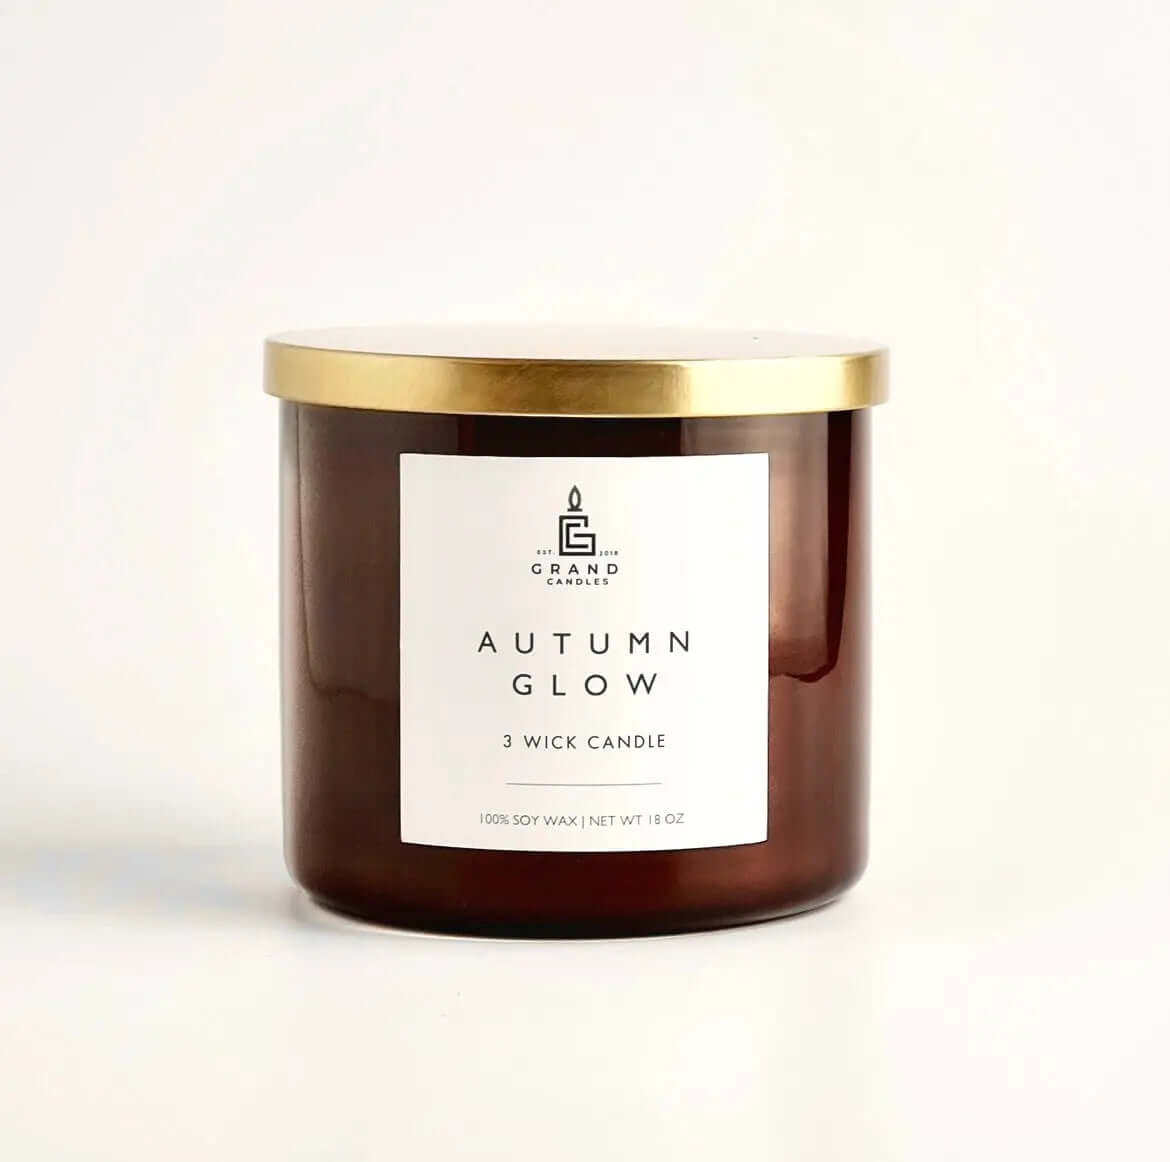 Autumn Glow Soy Candle Grand Candles LLC